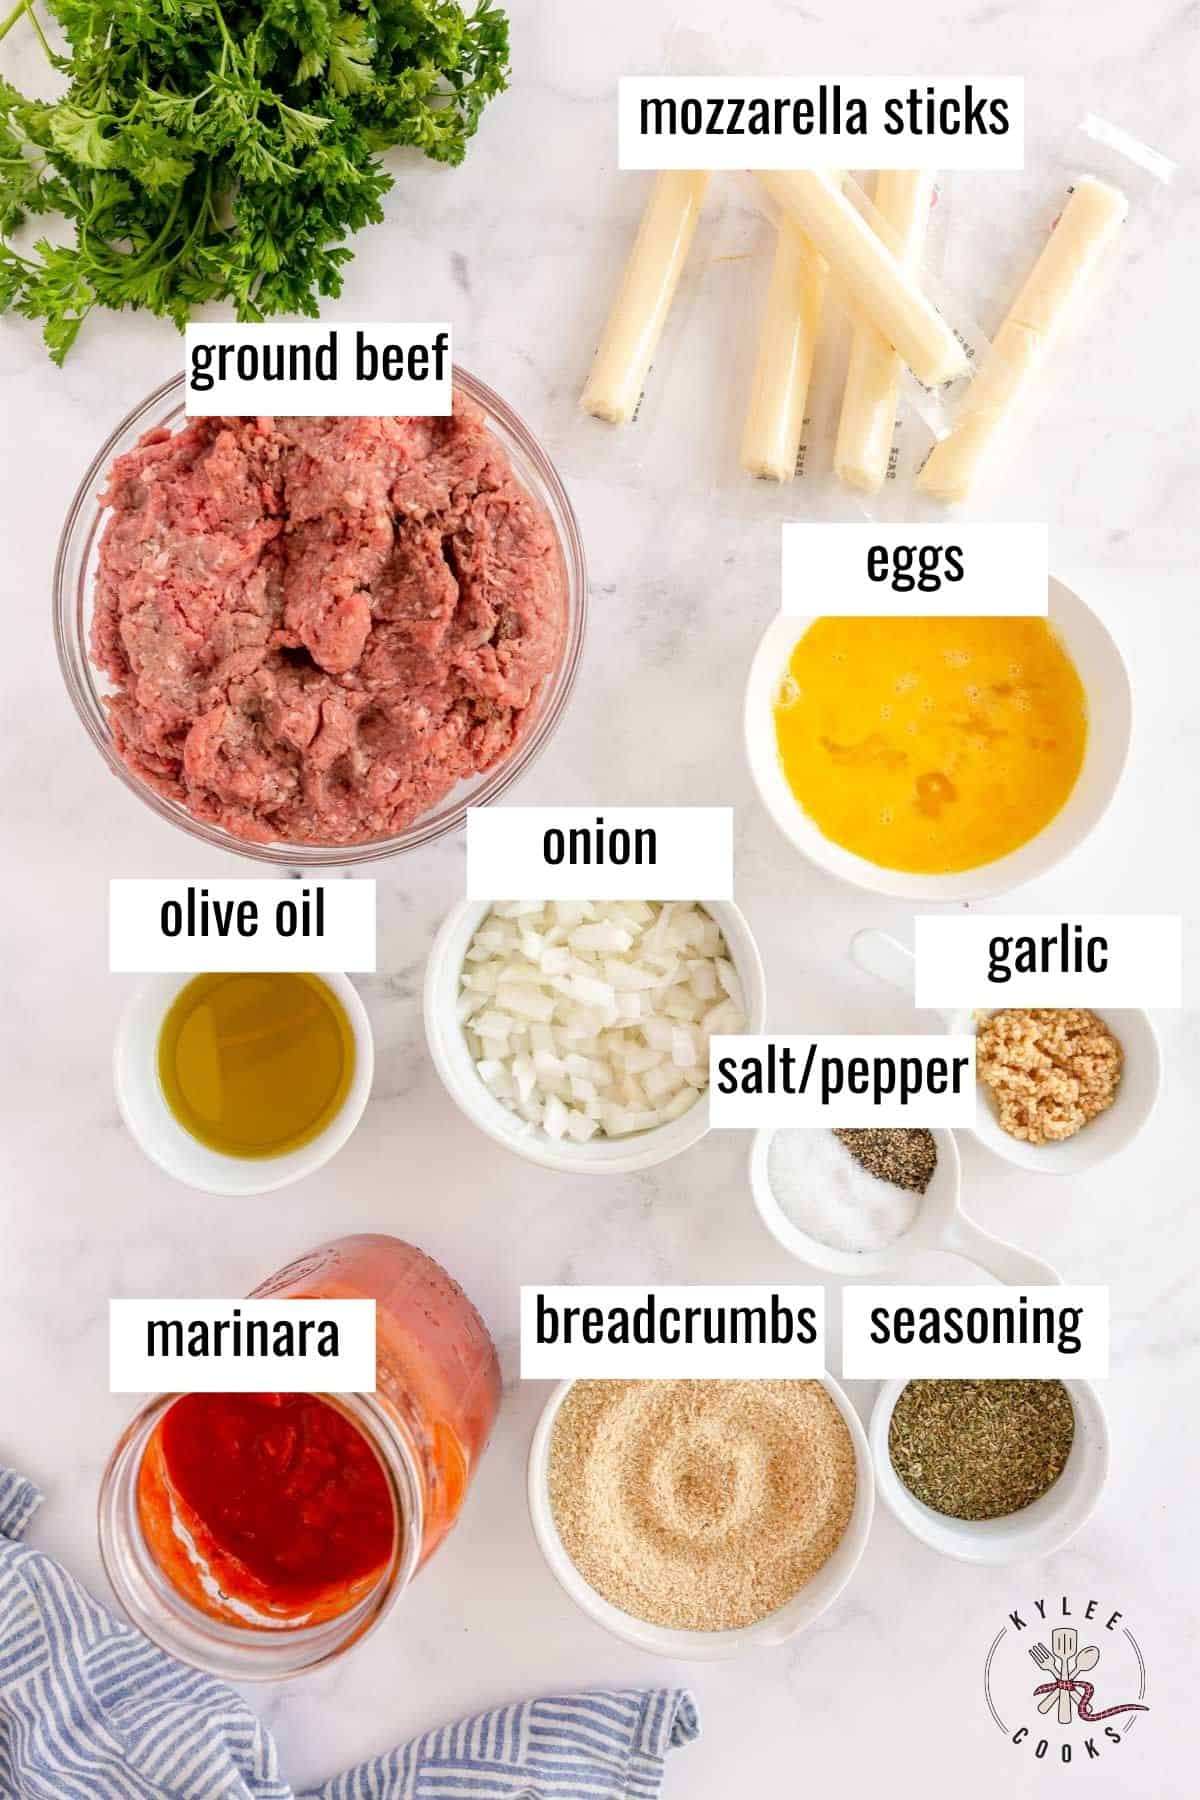 ingredients to make cheese stuffed meatballs laid out and labeled